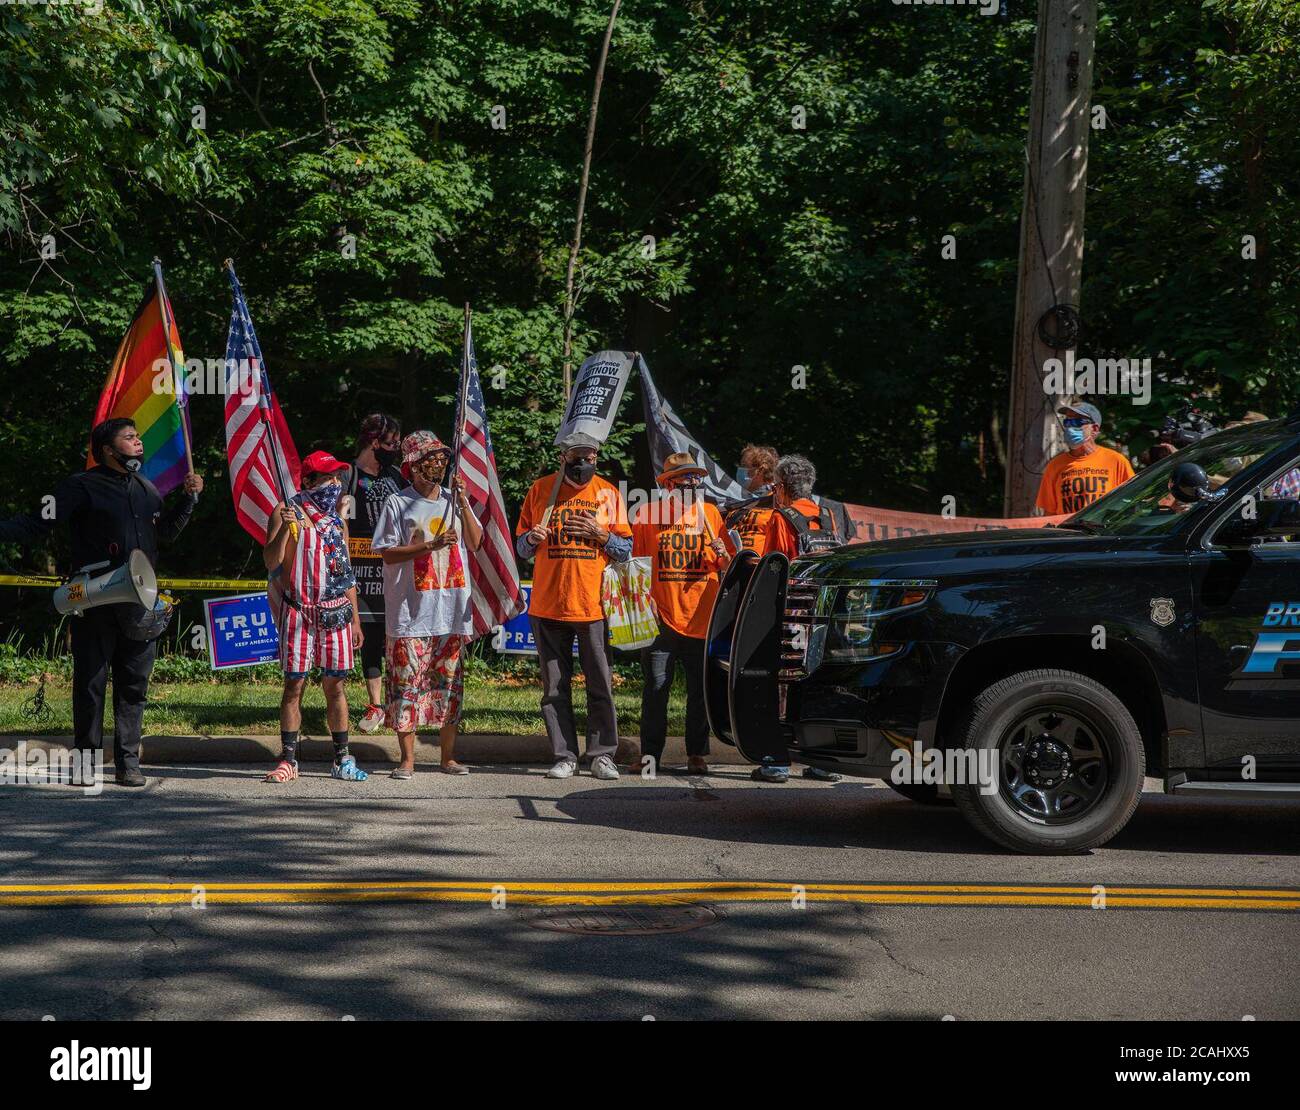 Bratenahl, USA. 06th Aug, 2020. Anti-President Trump protestors stand in the road, blocking a police car, in front of the Shoreby Club in Bratenahl, Ohio on August 6, 2020. President Trump plans to attend a private fundraiser at the Shoreby Club later in the evening. (Photo by Matt Shiffler/Sipa USA) Credit: Sipa USA/Alamy Live News Stock Photo